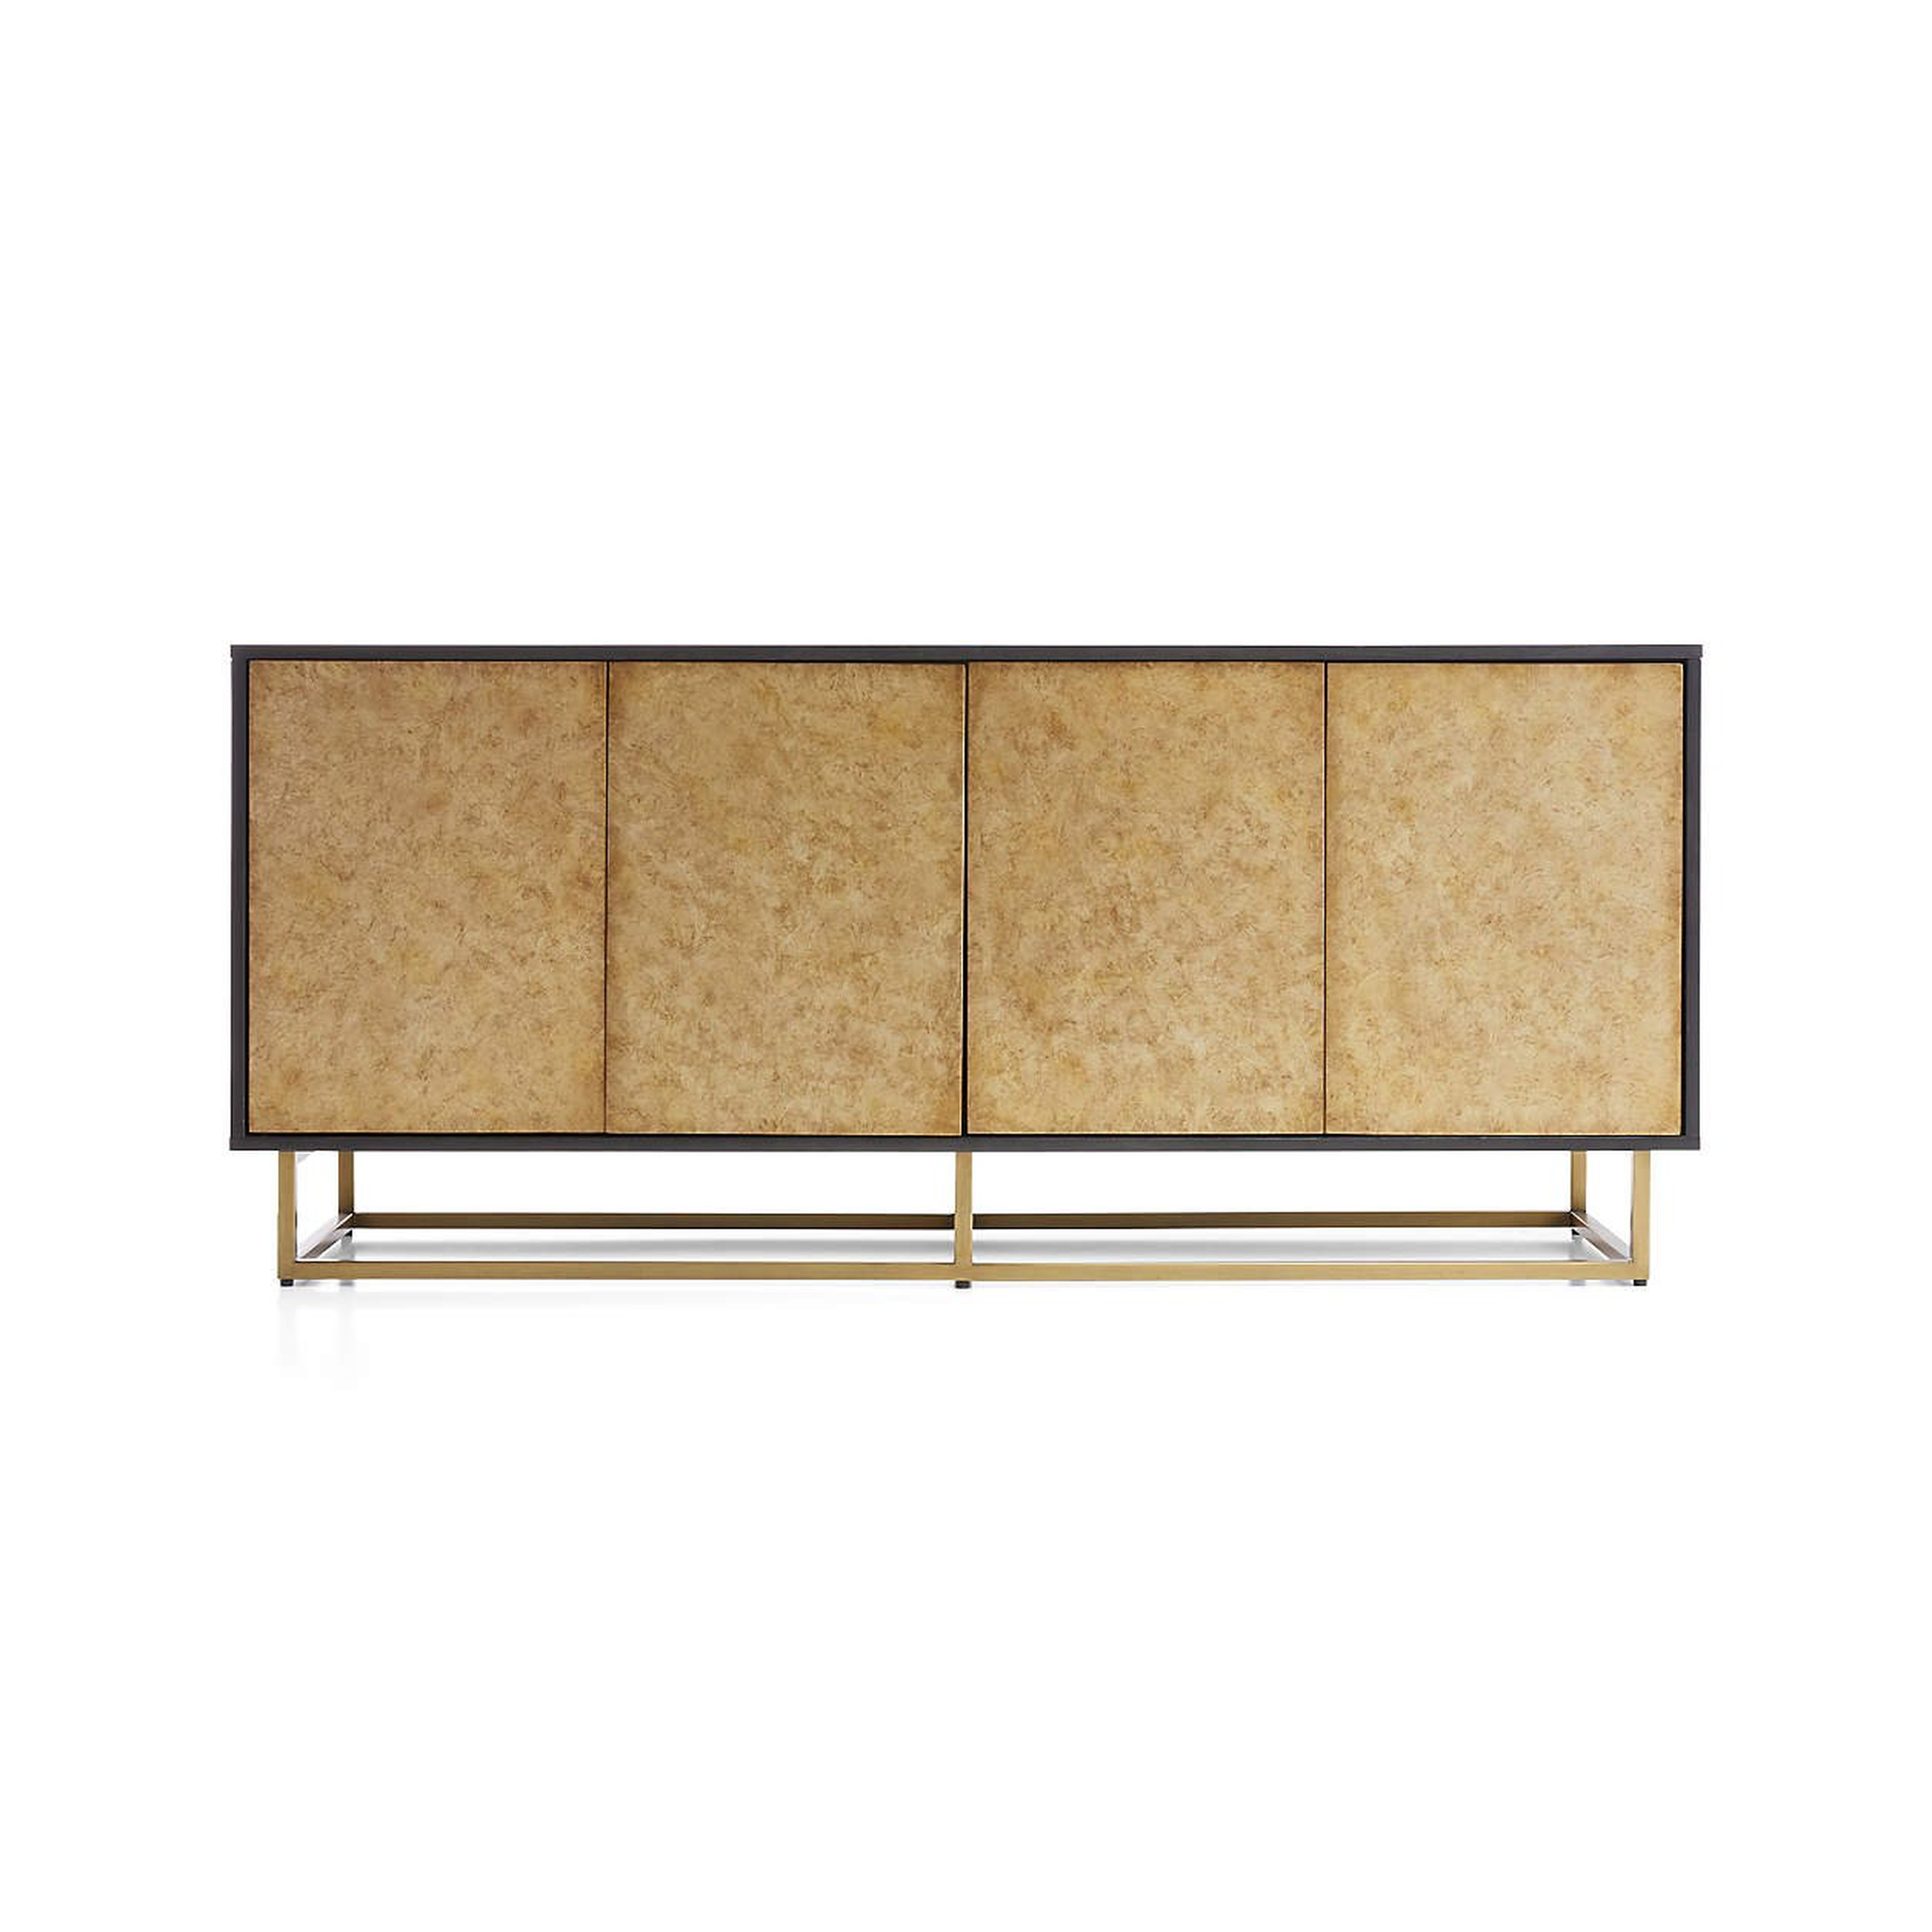 Mineral Media Console - Crate and Barrel